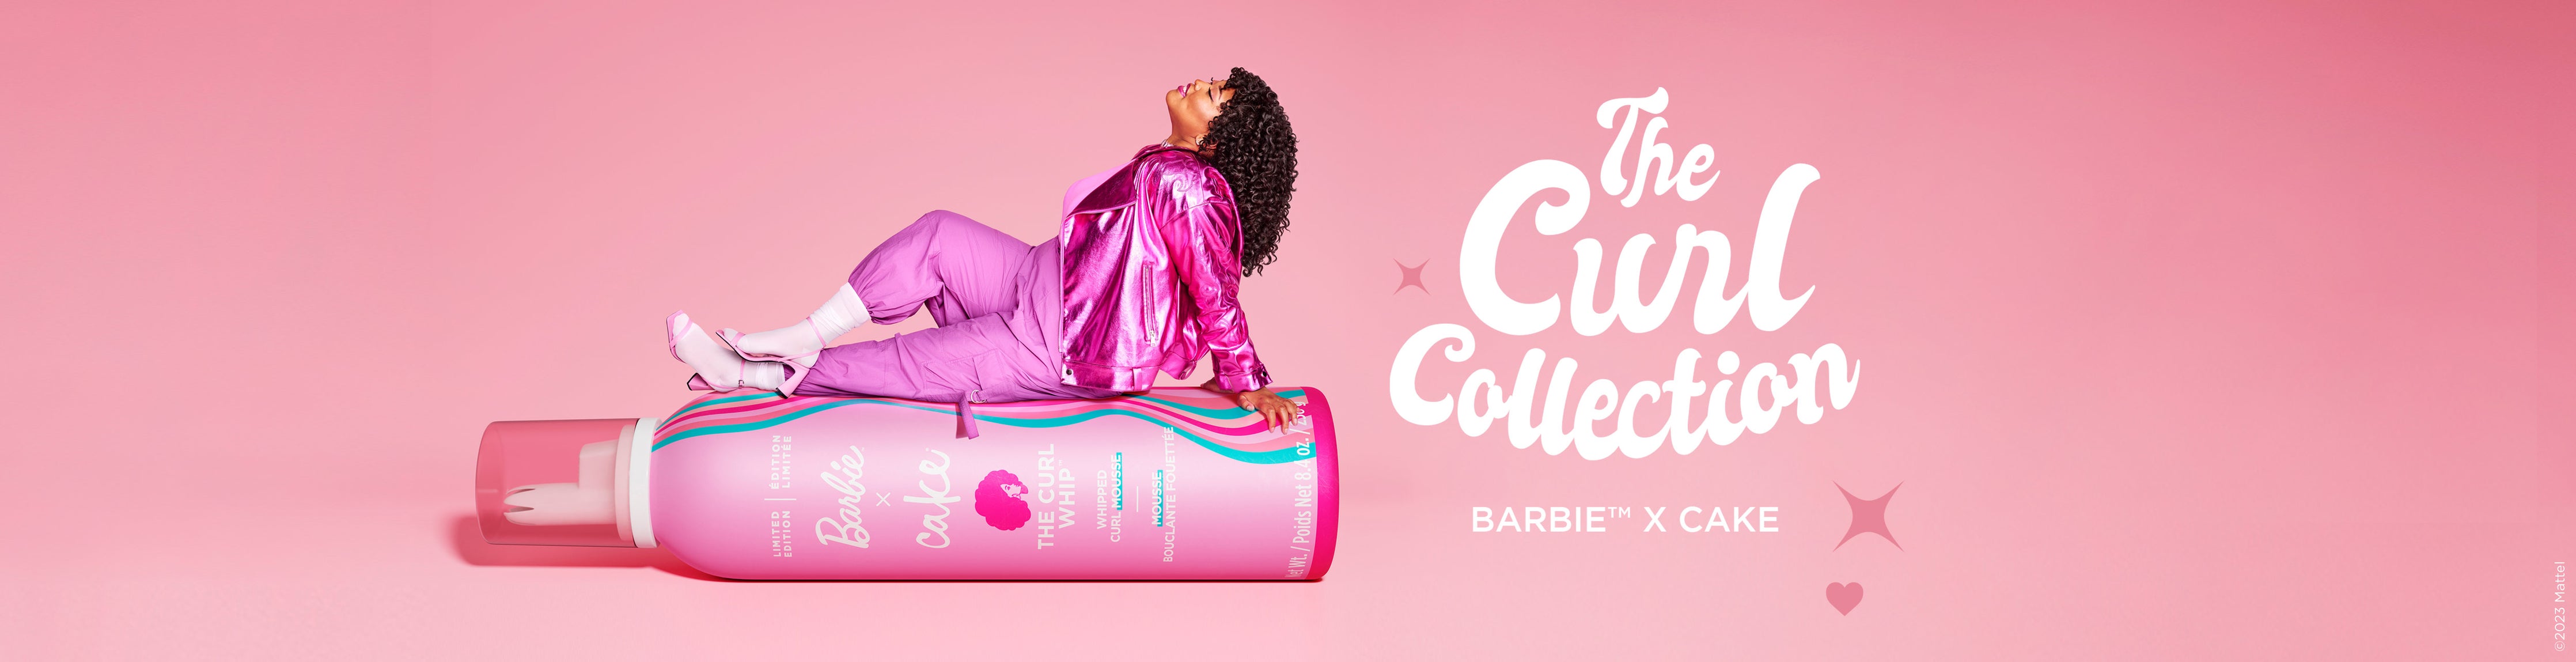 Barbie x Cake Curl Collection